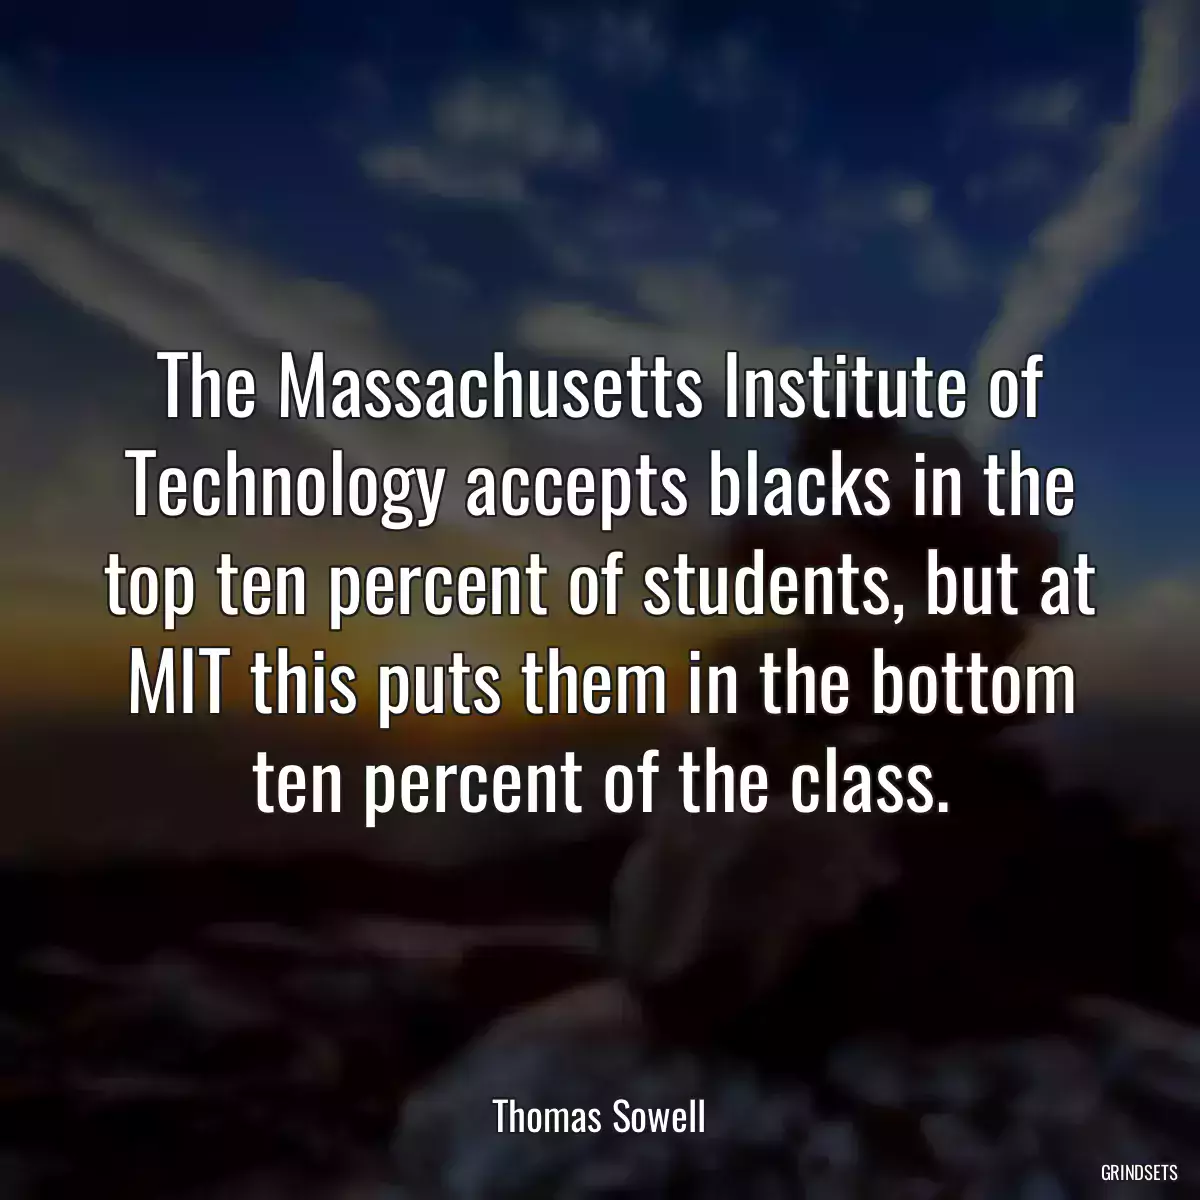 The Massachusetts Institute of Technology accepts blacks in the top ten percent of students, but at MIT this puts them in the bottom ten percent of the class.